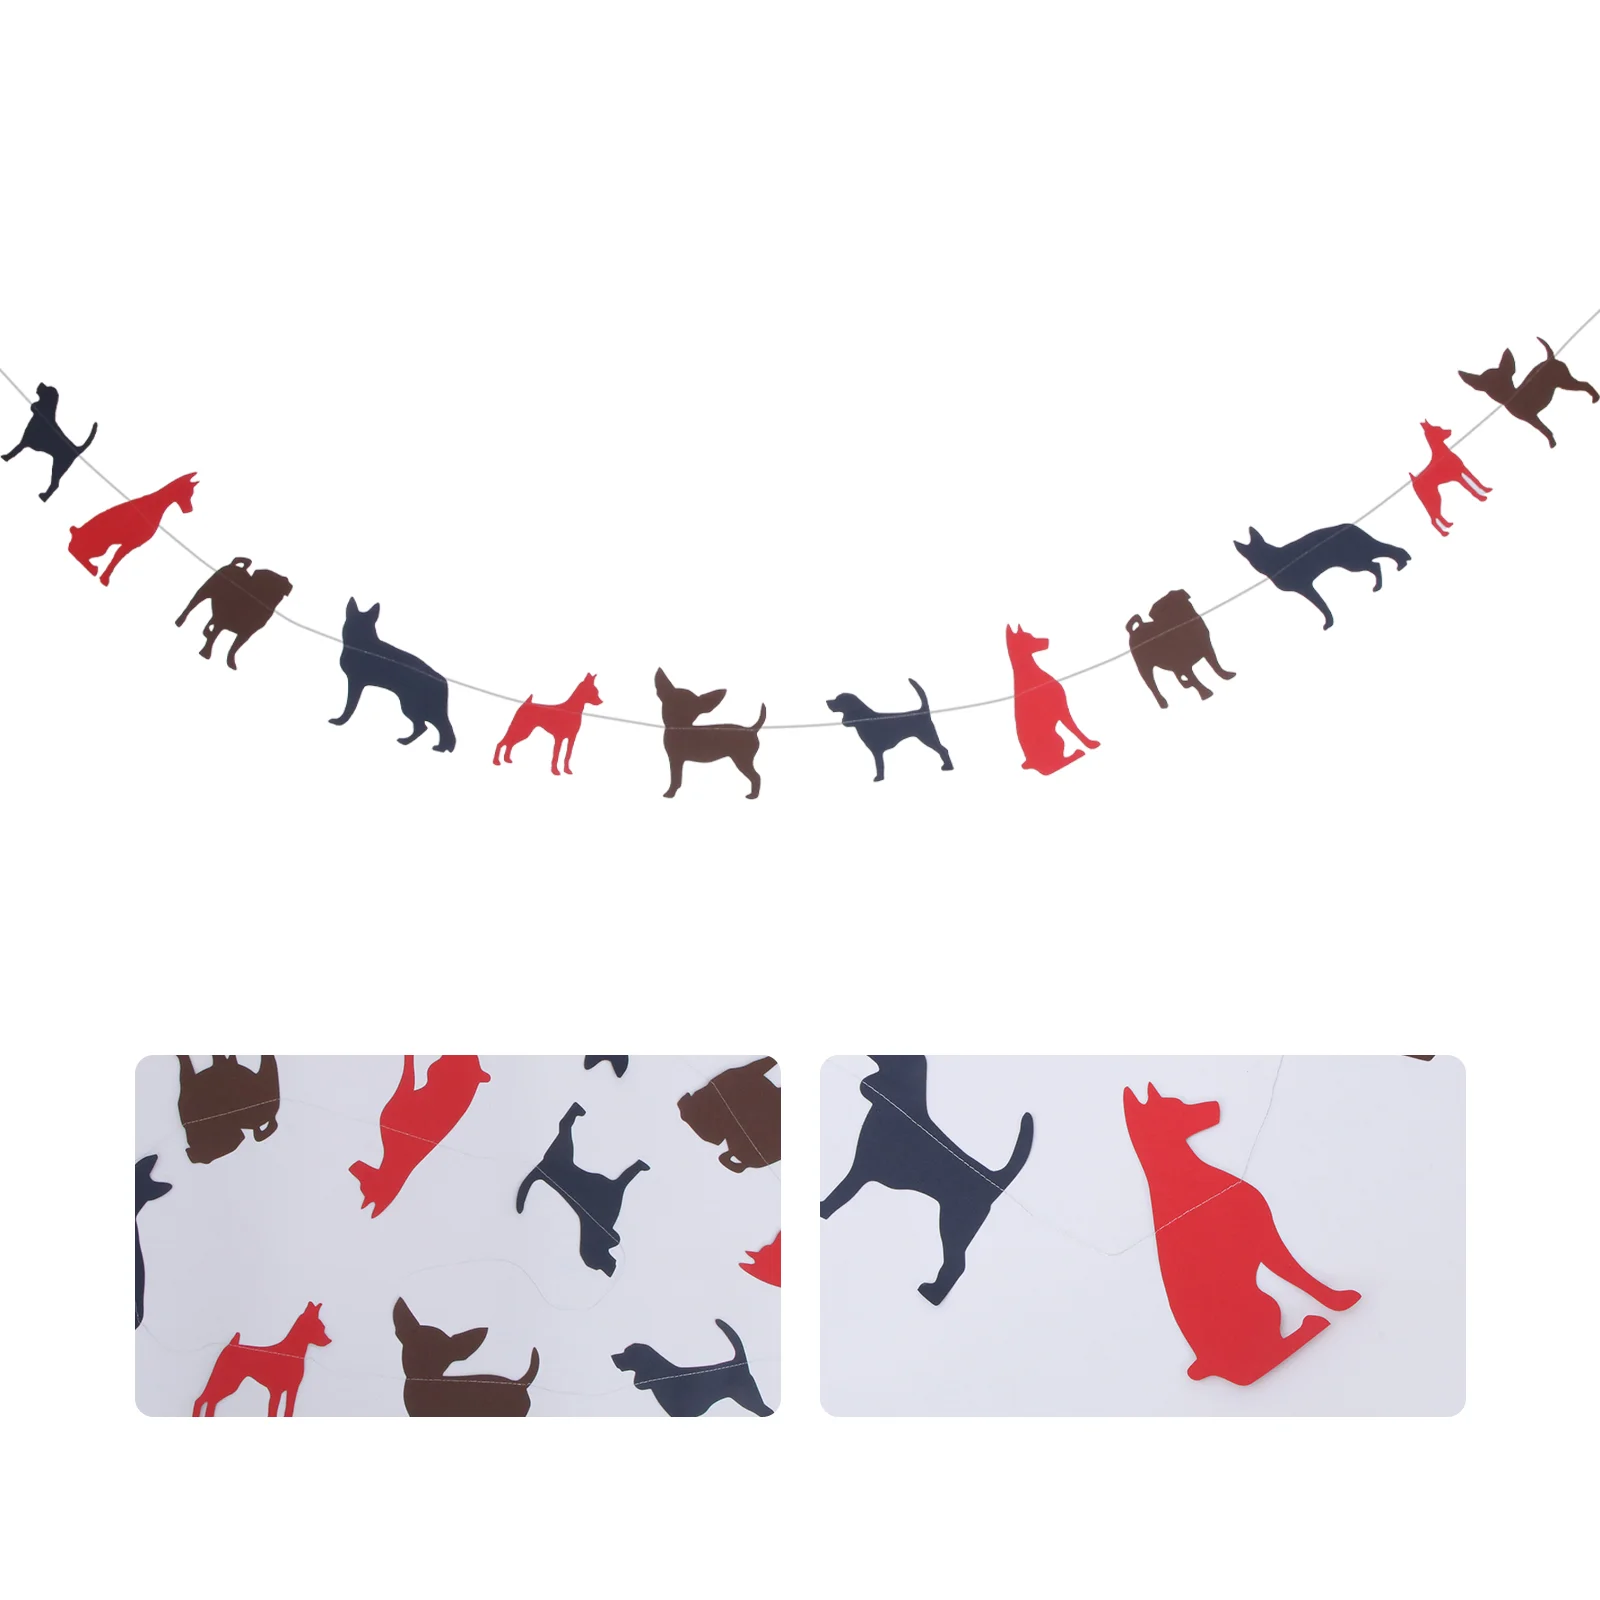 

Banner Birthday Dog Party Pet Cat Supplies Garland Decor Banners Decoration Shop Animals Door Celebration Hanging Favors Bunting